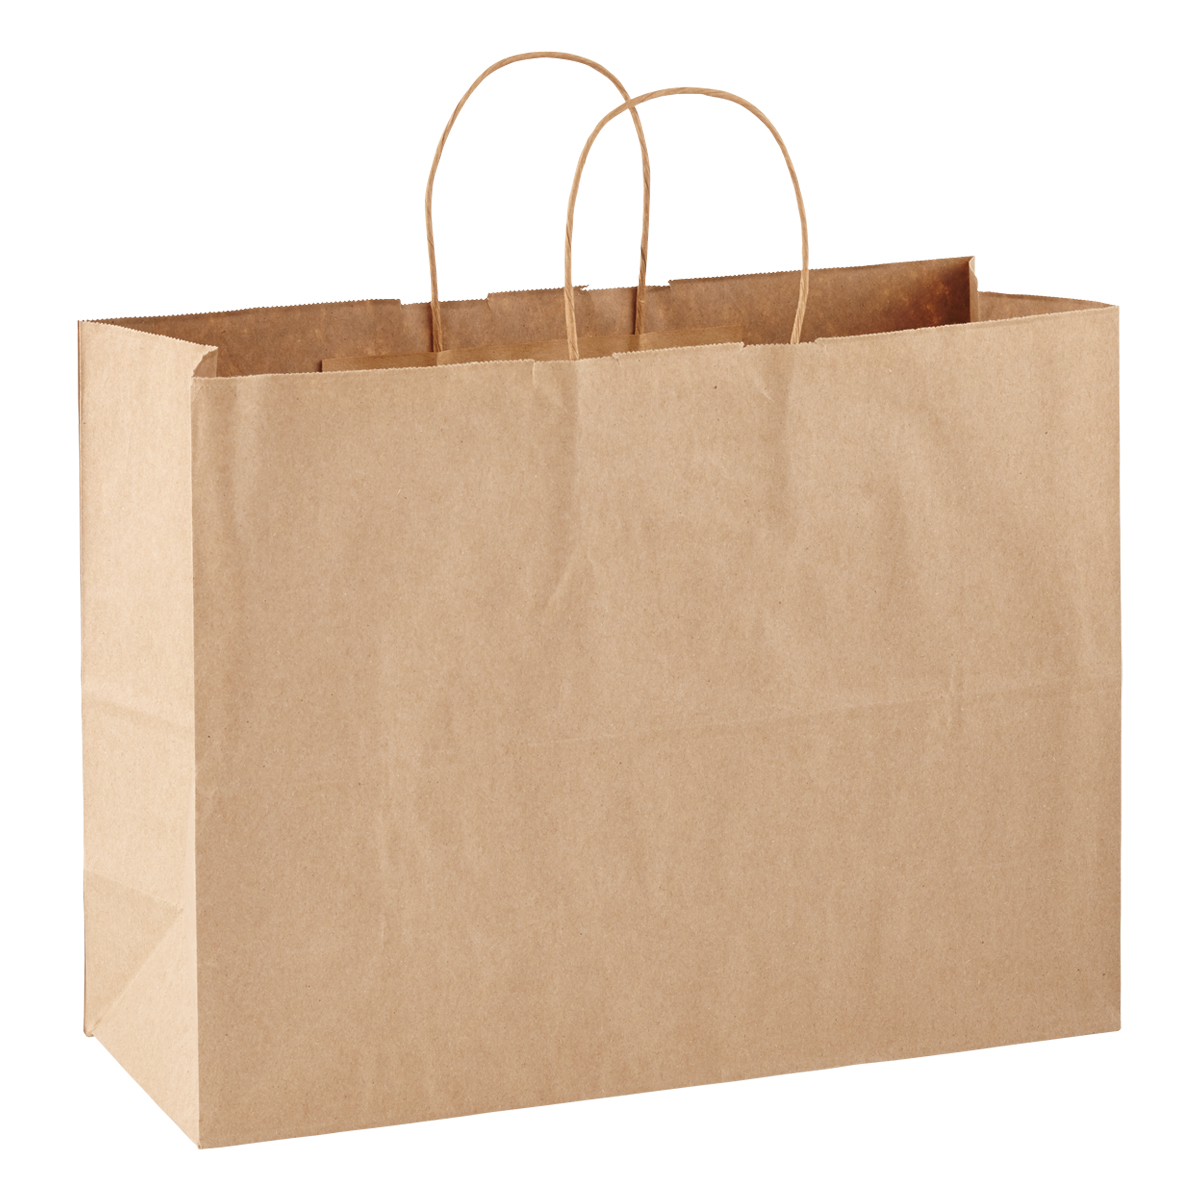 3x3.5 Assorted Tote Gift Bags Pastel Paper Shopping Bag With Handle Pack of  20 - Findings Outlet